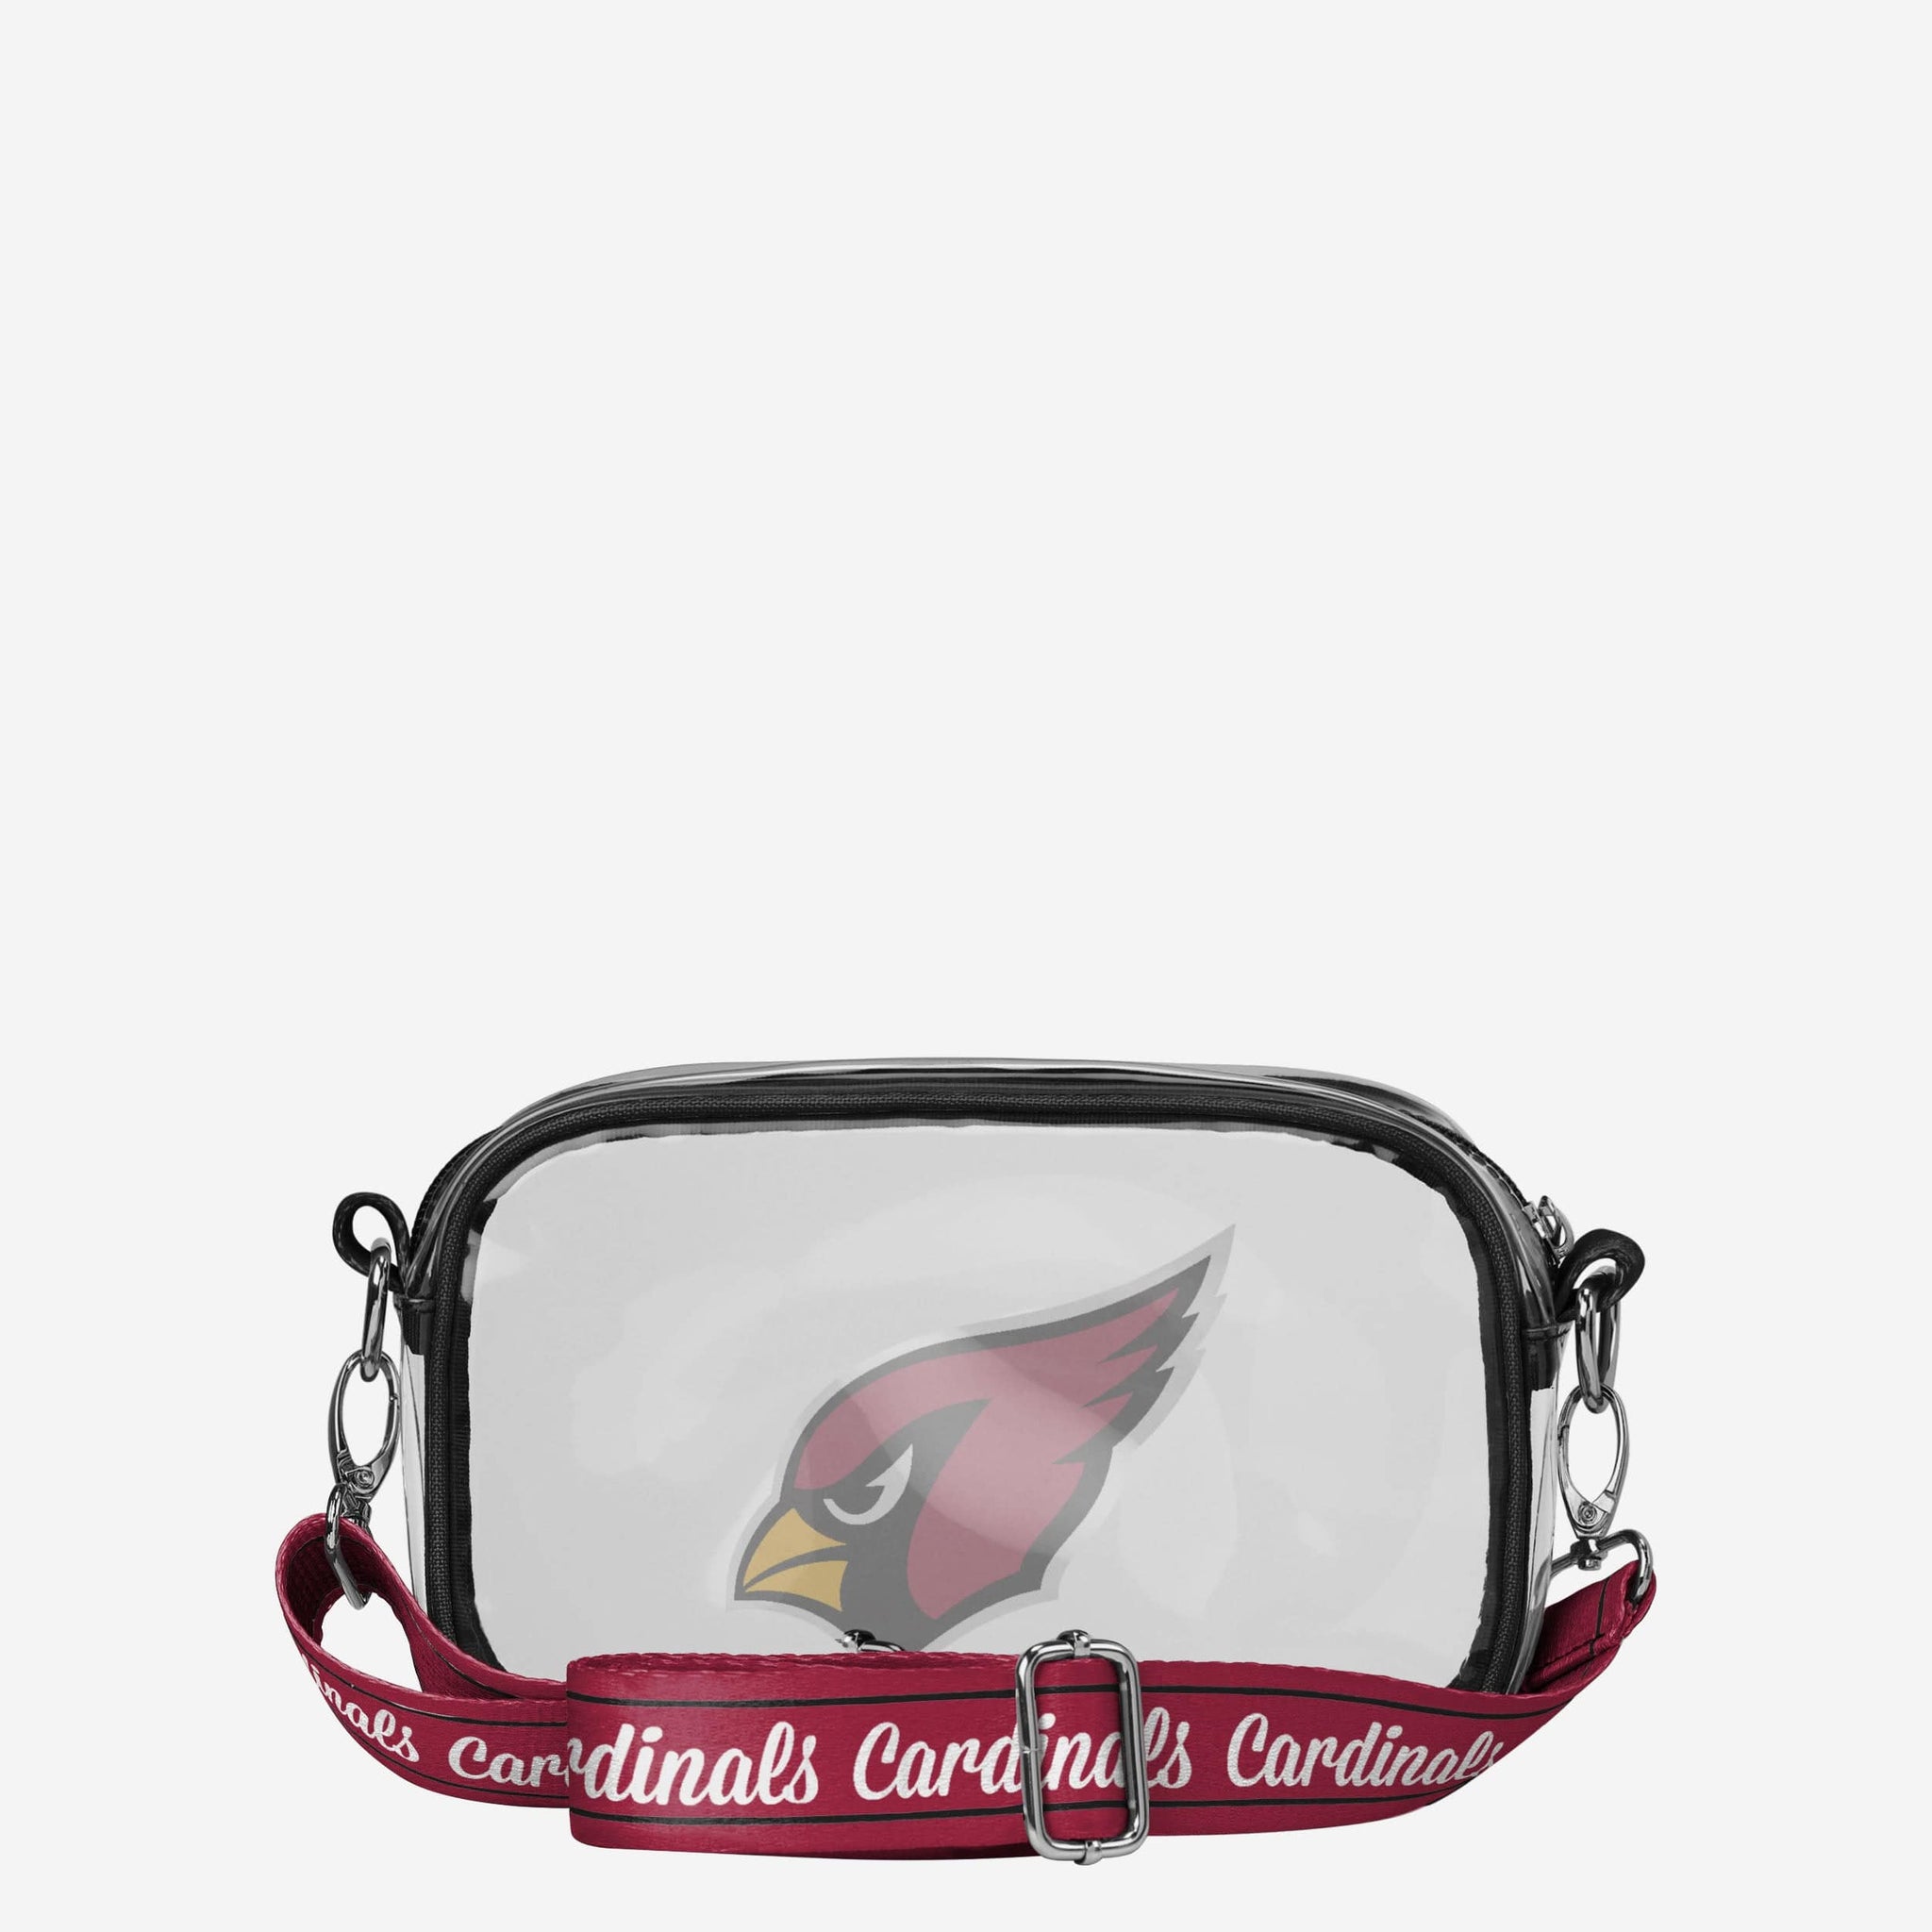 Louisville Cardinals Bag / Luggage Tag